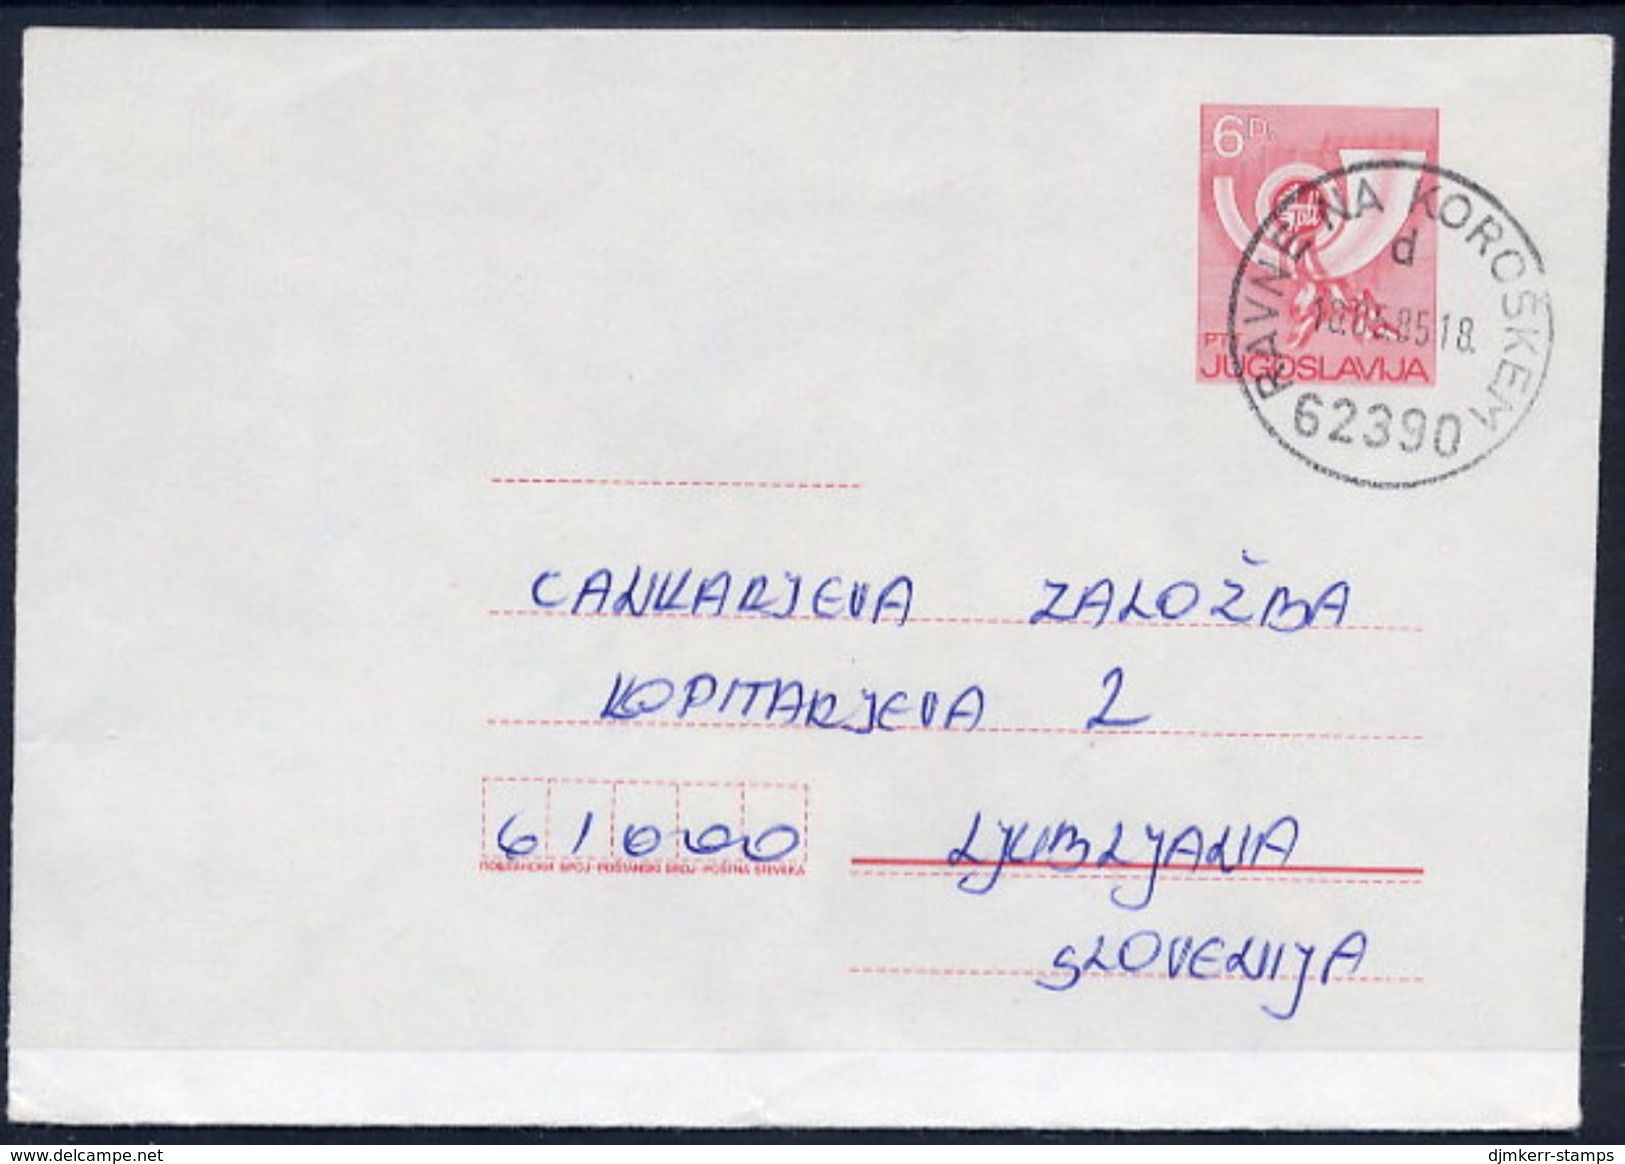 YUGOSLAVIA 1984 Posthorn 6 D.stationery Envelope Used Without Additional Franking.  Michel U73 - Entiers Postaux